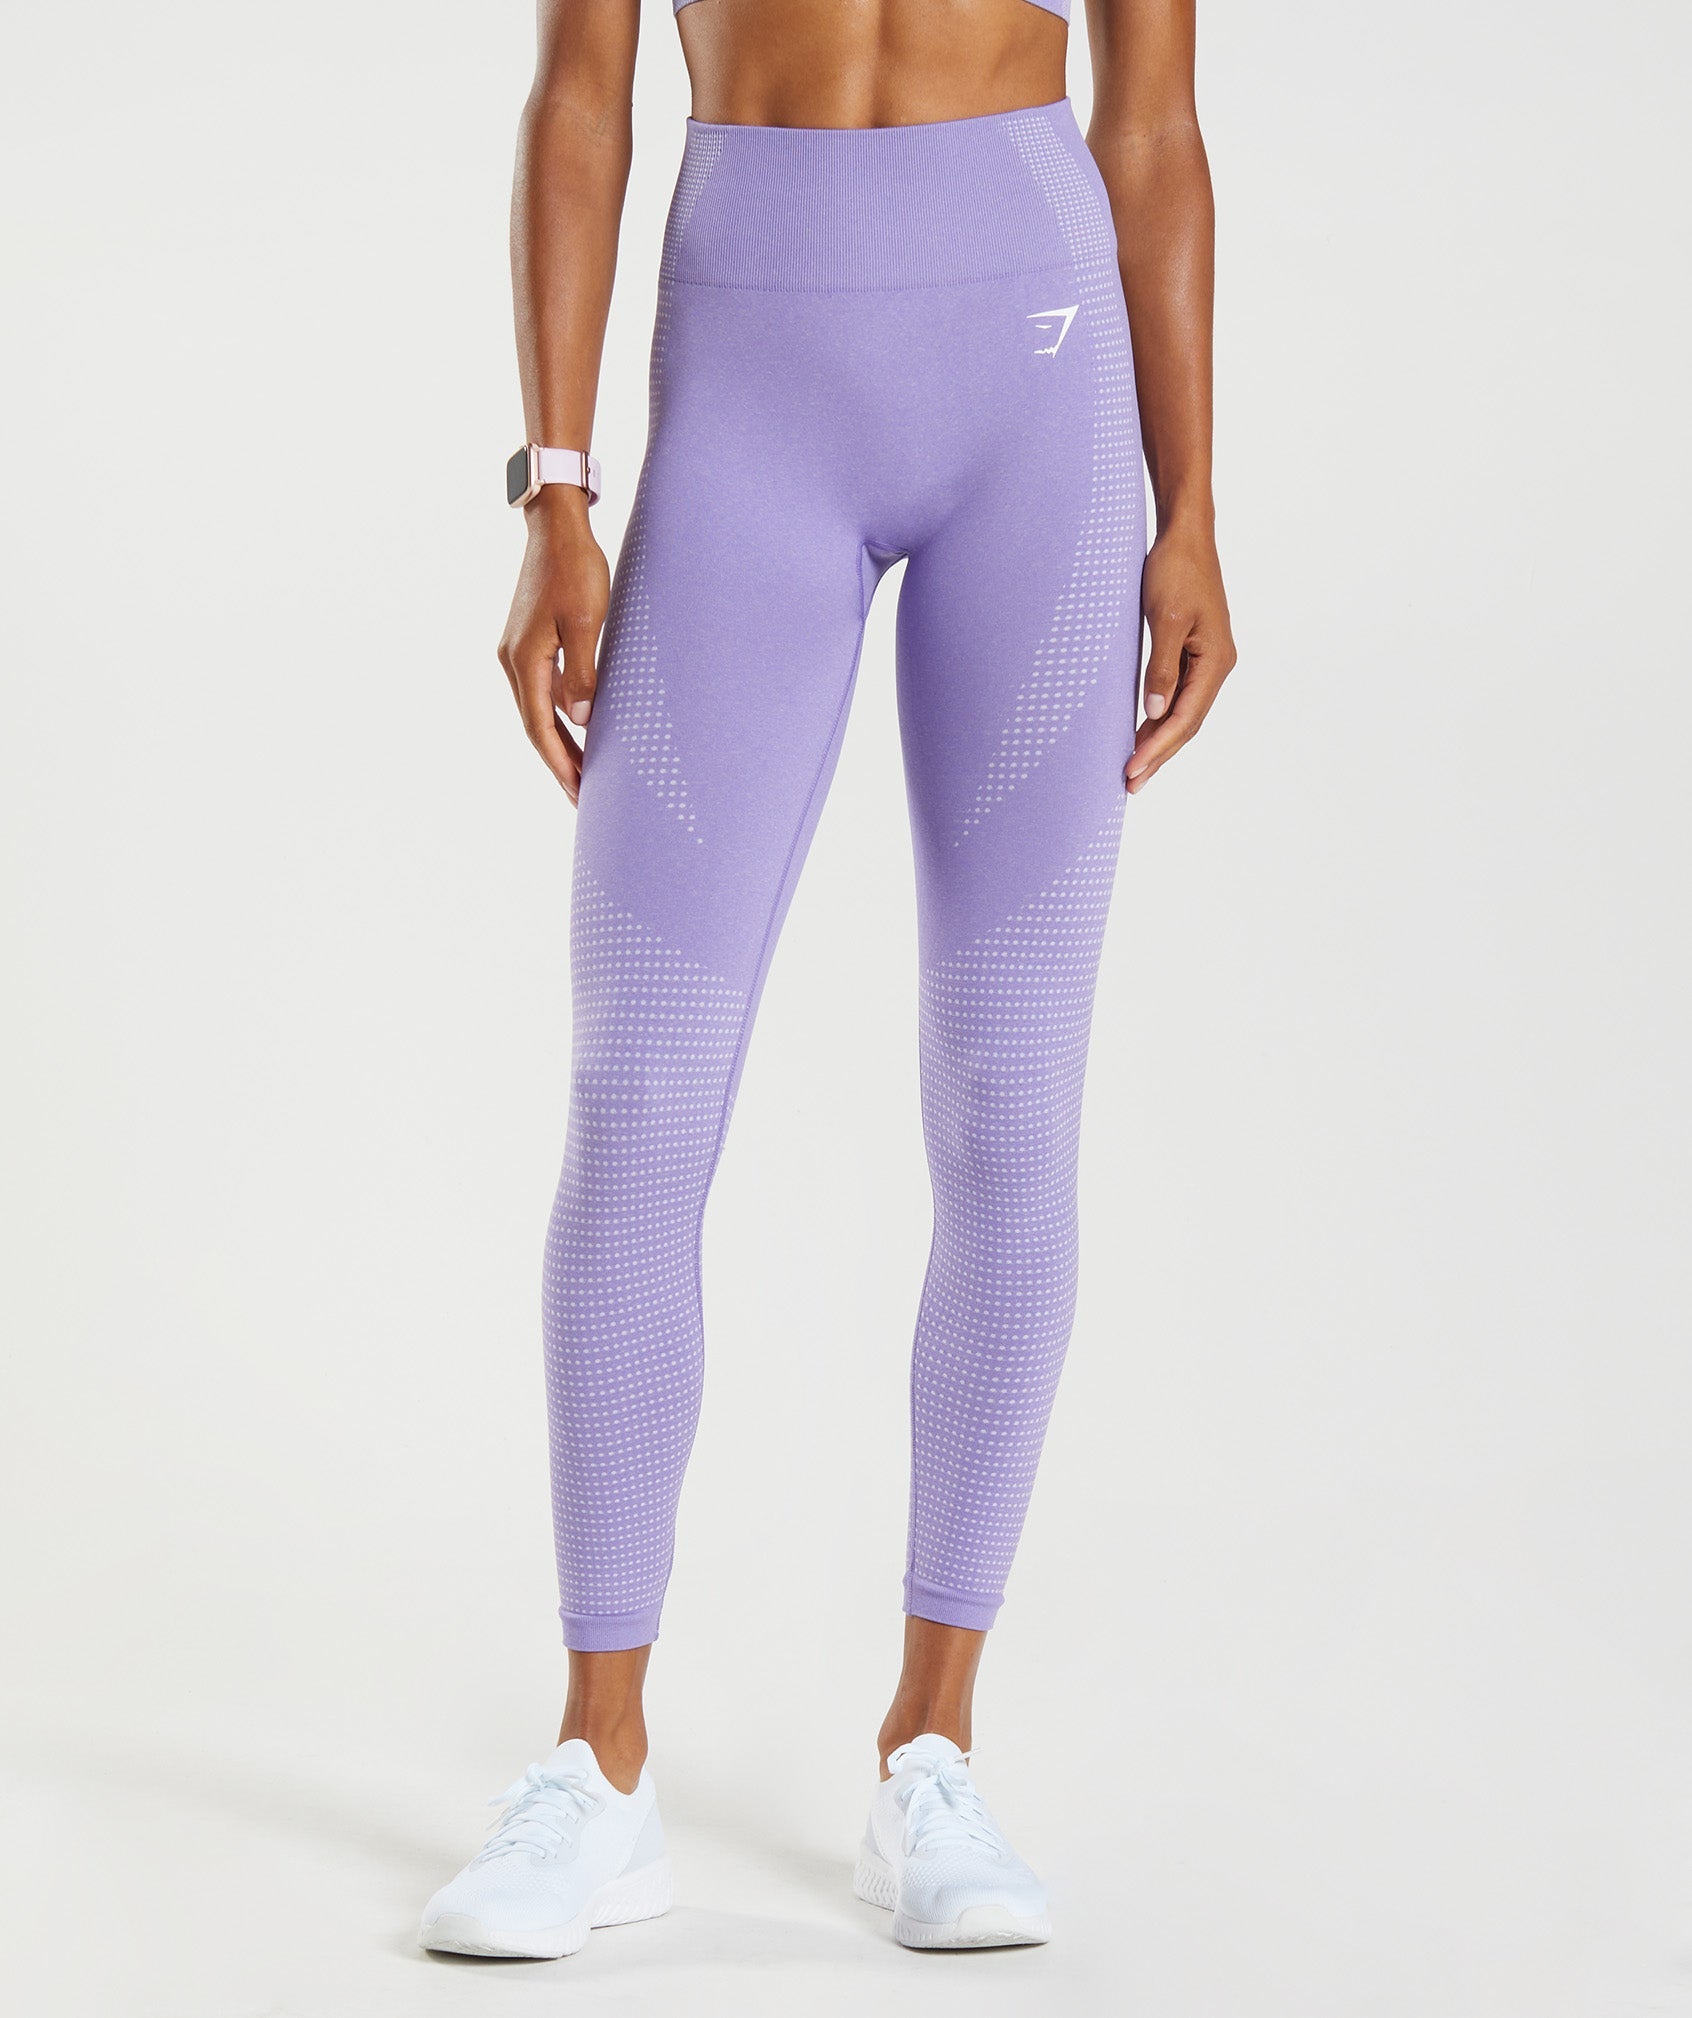 Gymshark Energy Seamless Leggings Tights Purple size XS - $31 - From Rebecca